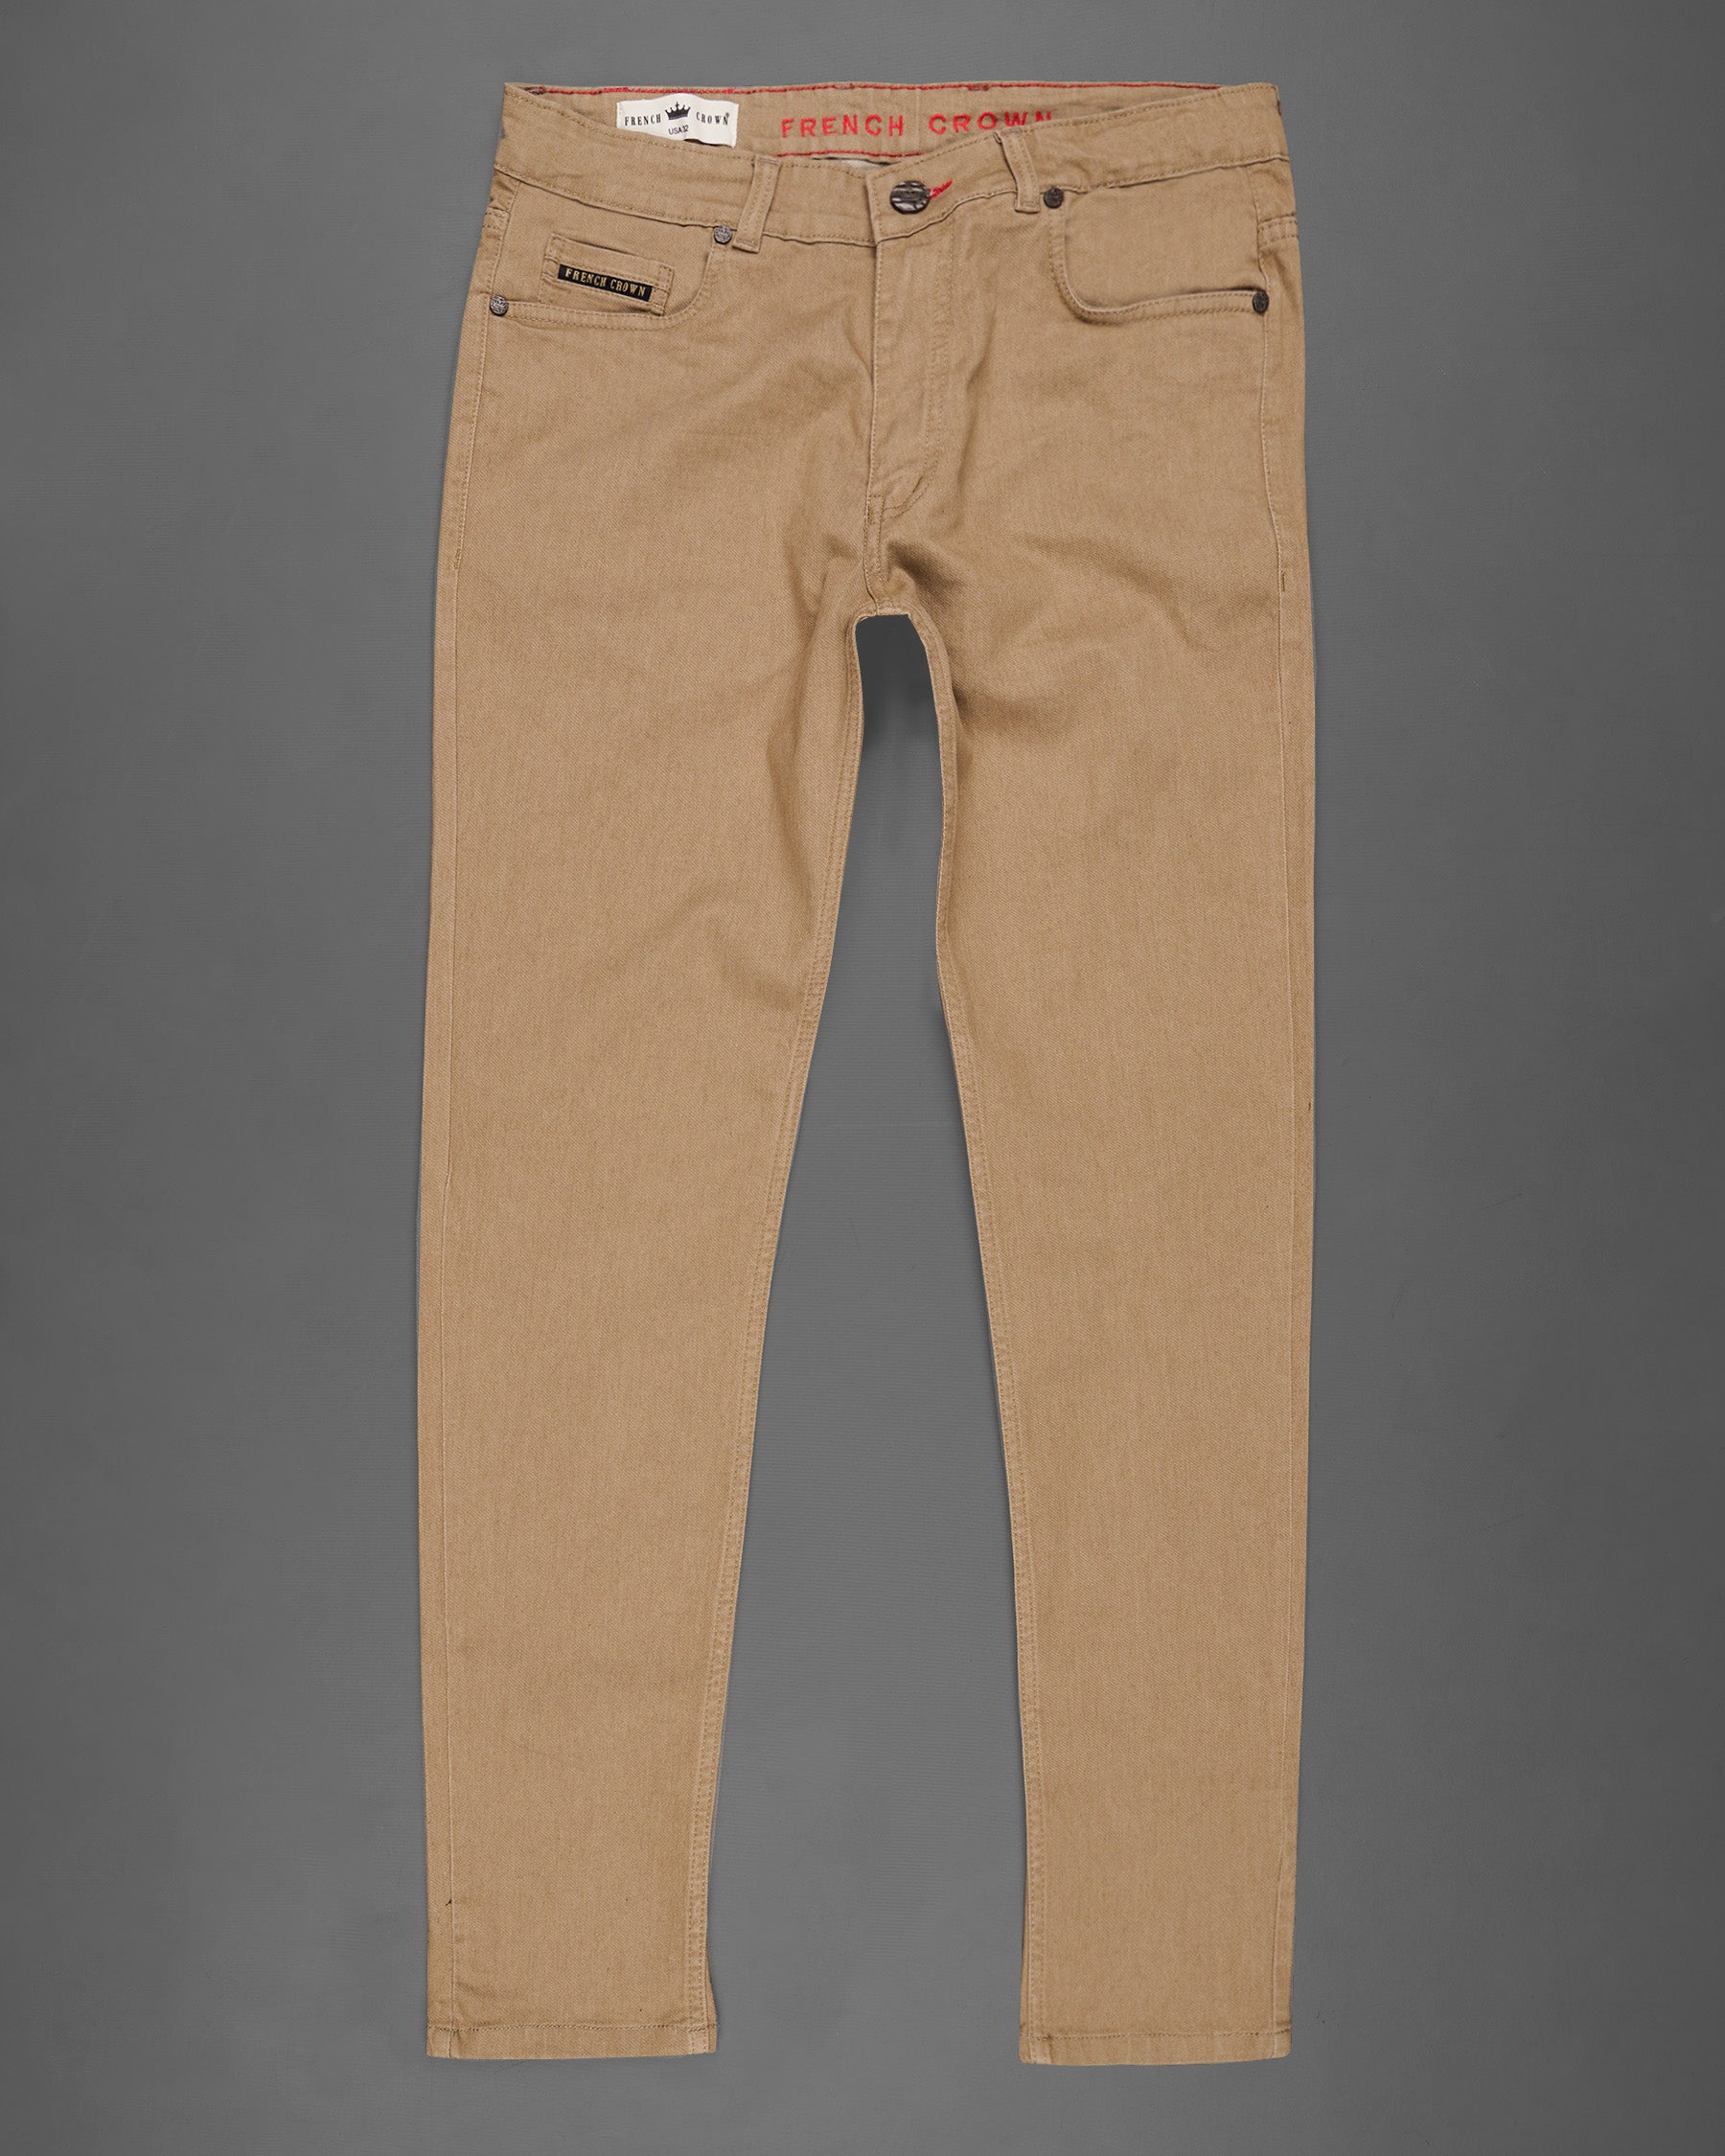 Buy Brown Jeans For Men Online in India - French Crown